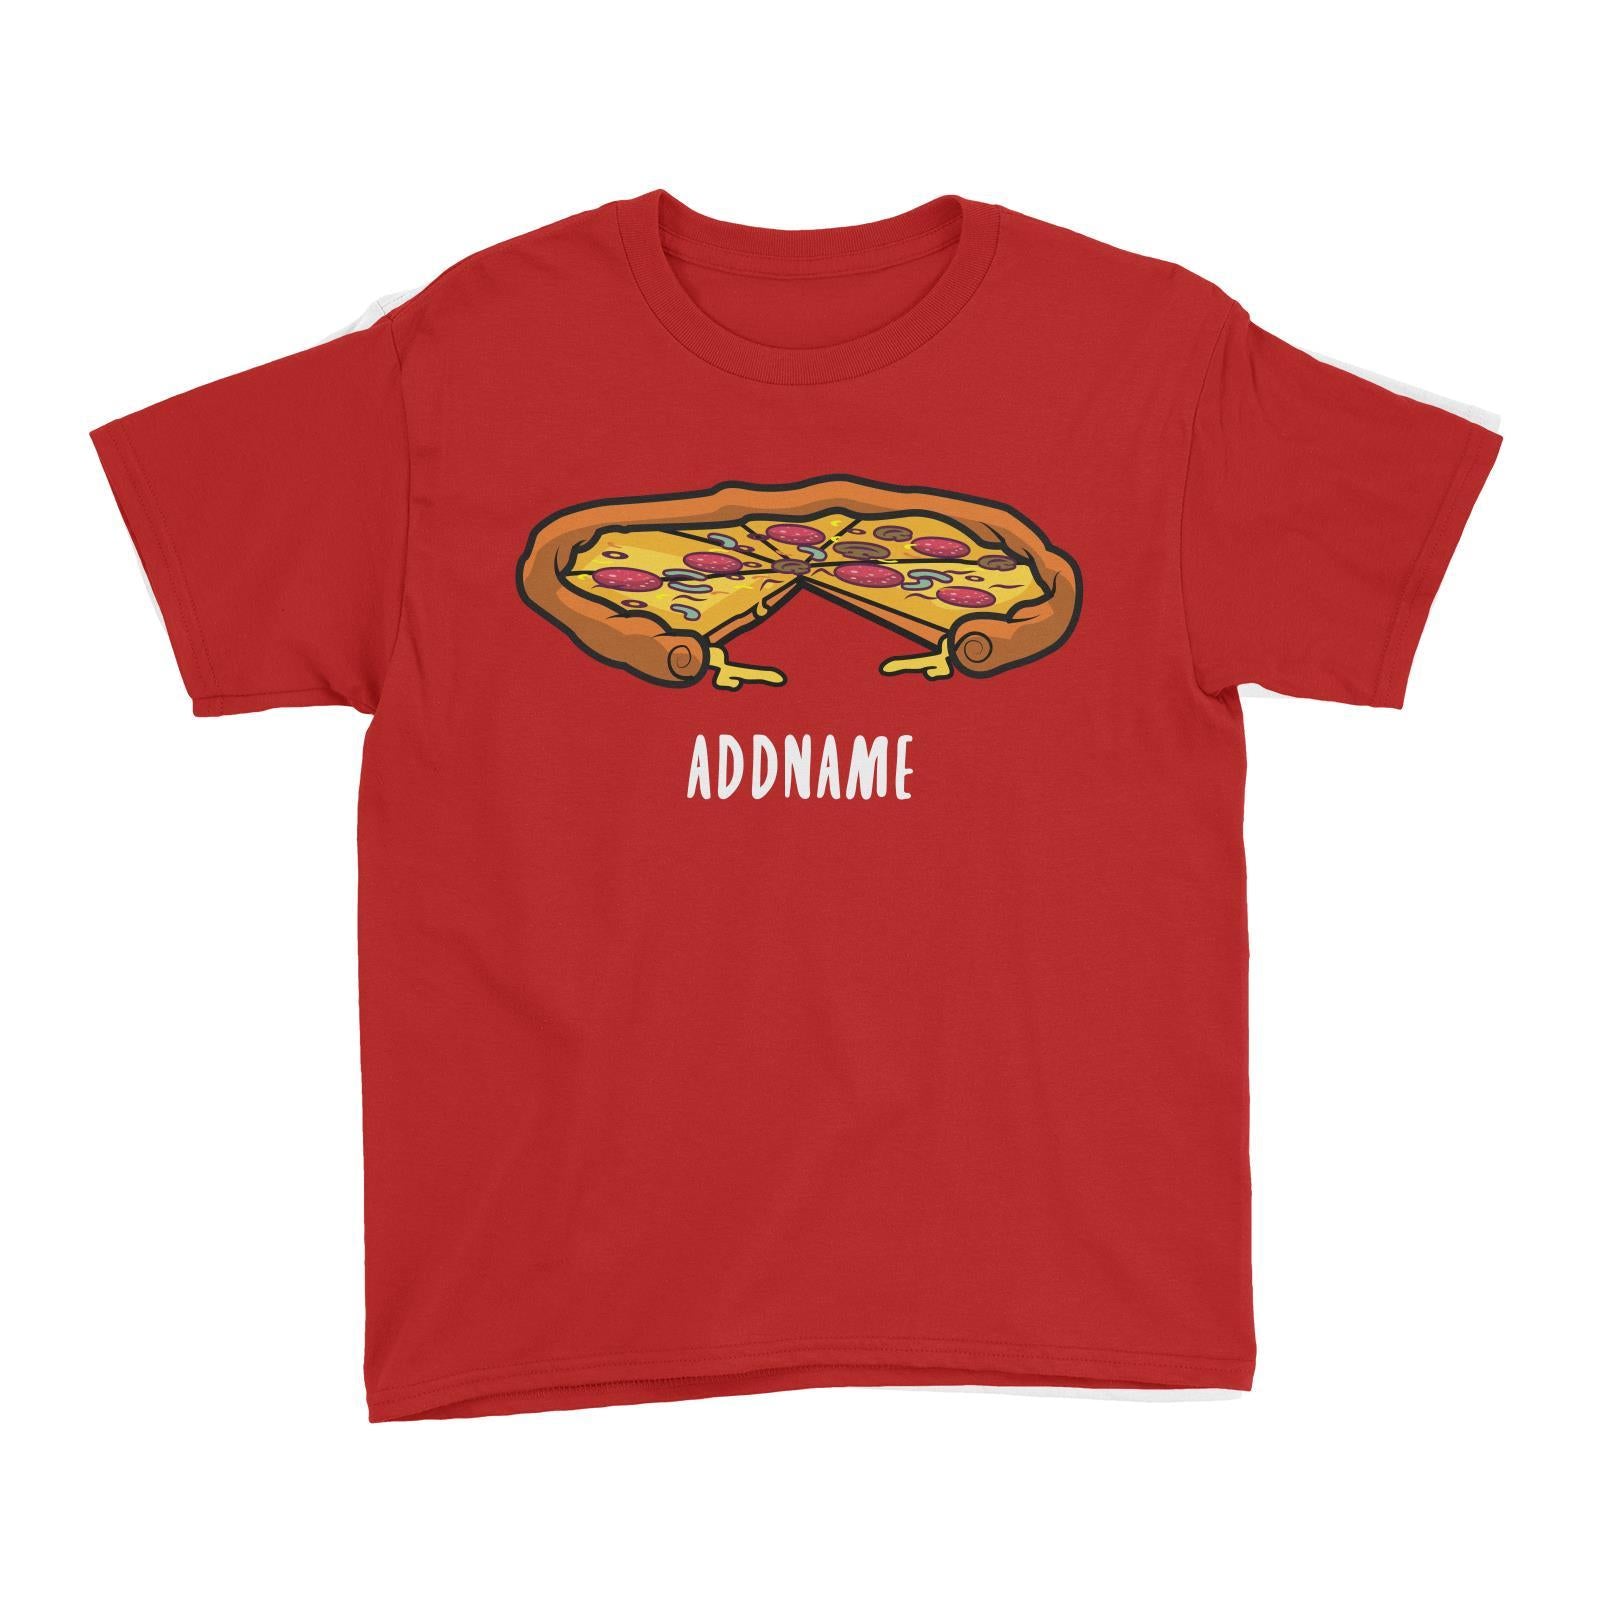 Fast Food Whole Pizza with A Slice Taken Out Addname Kid's T-Shirt  Matching Family Comic Cartoon Personalizable Designs